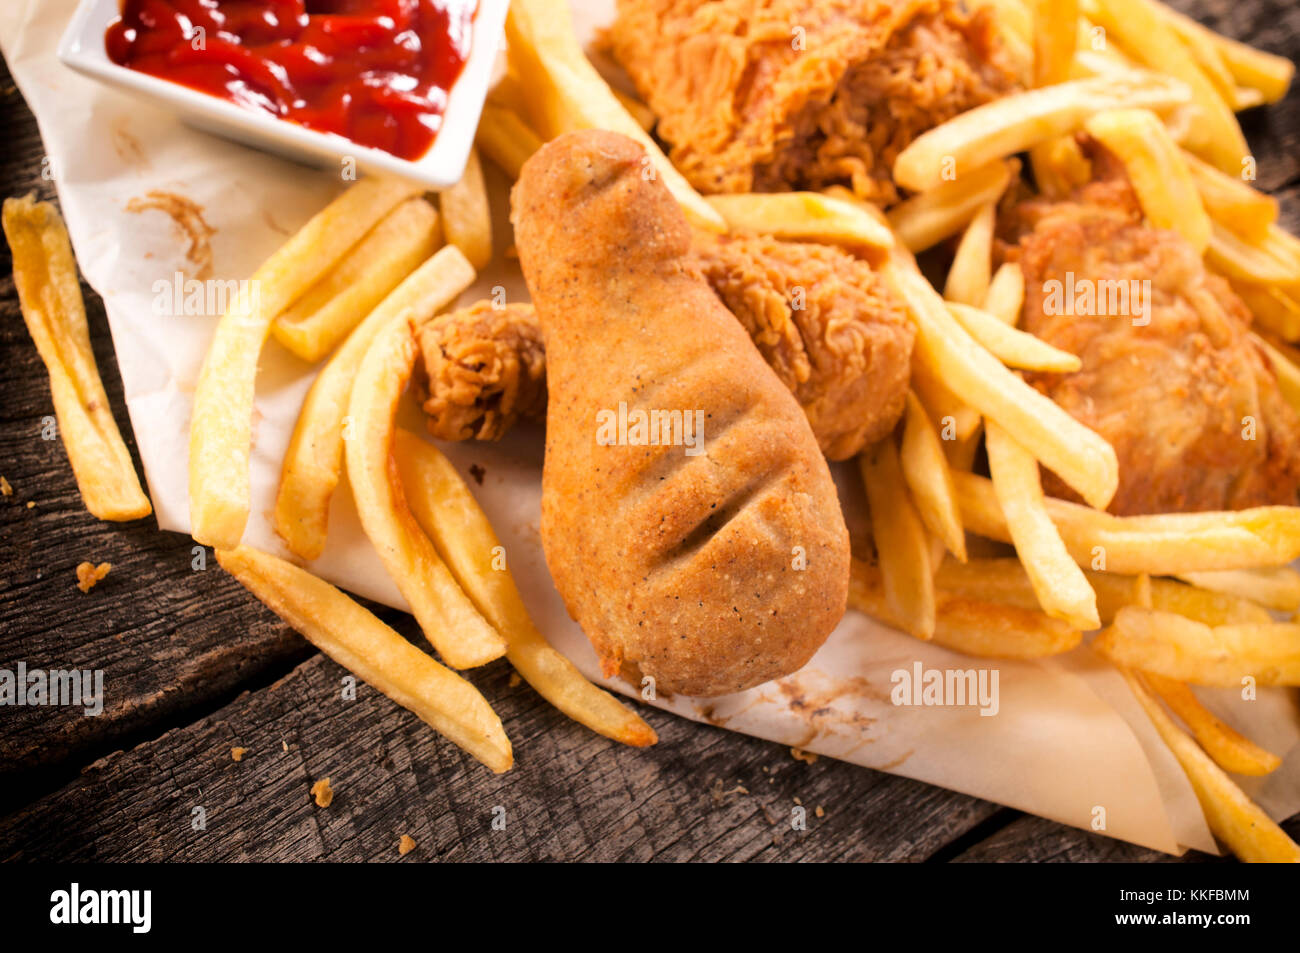 French fries and chicken legs on the wooden table.Selective focus on fried chicken leg in the middle Stock Photo